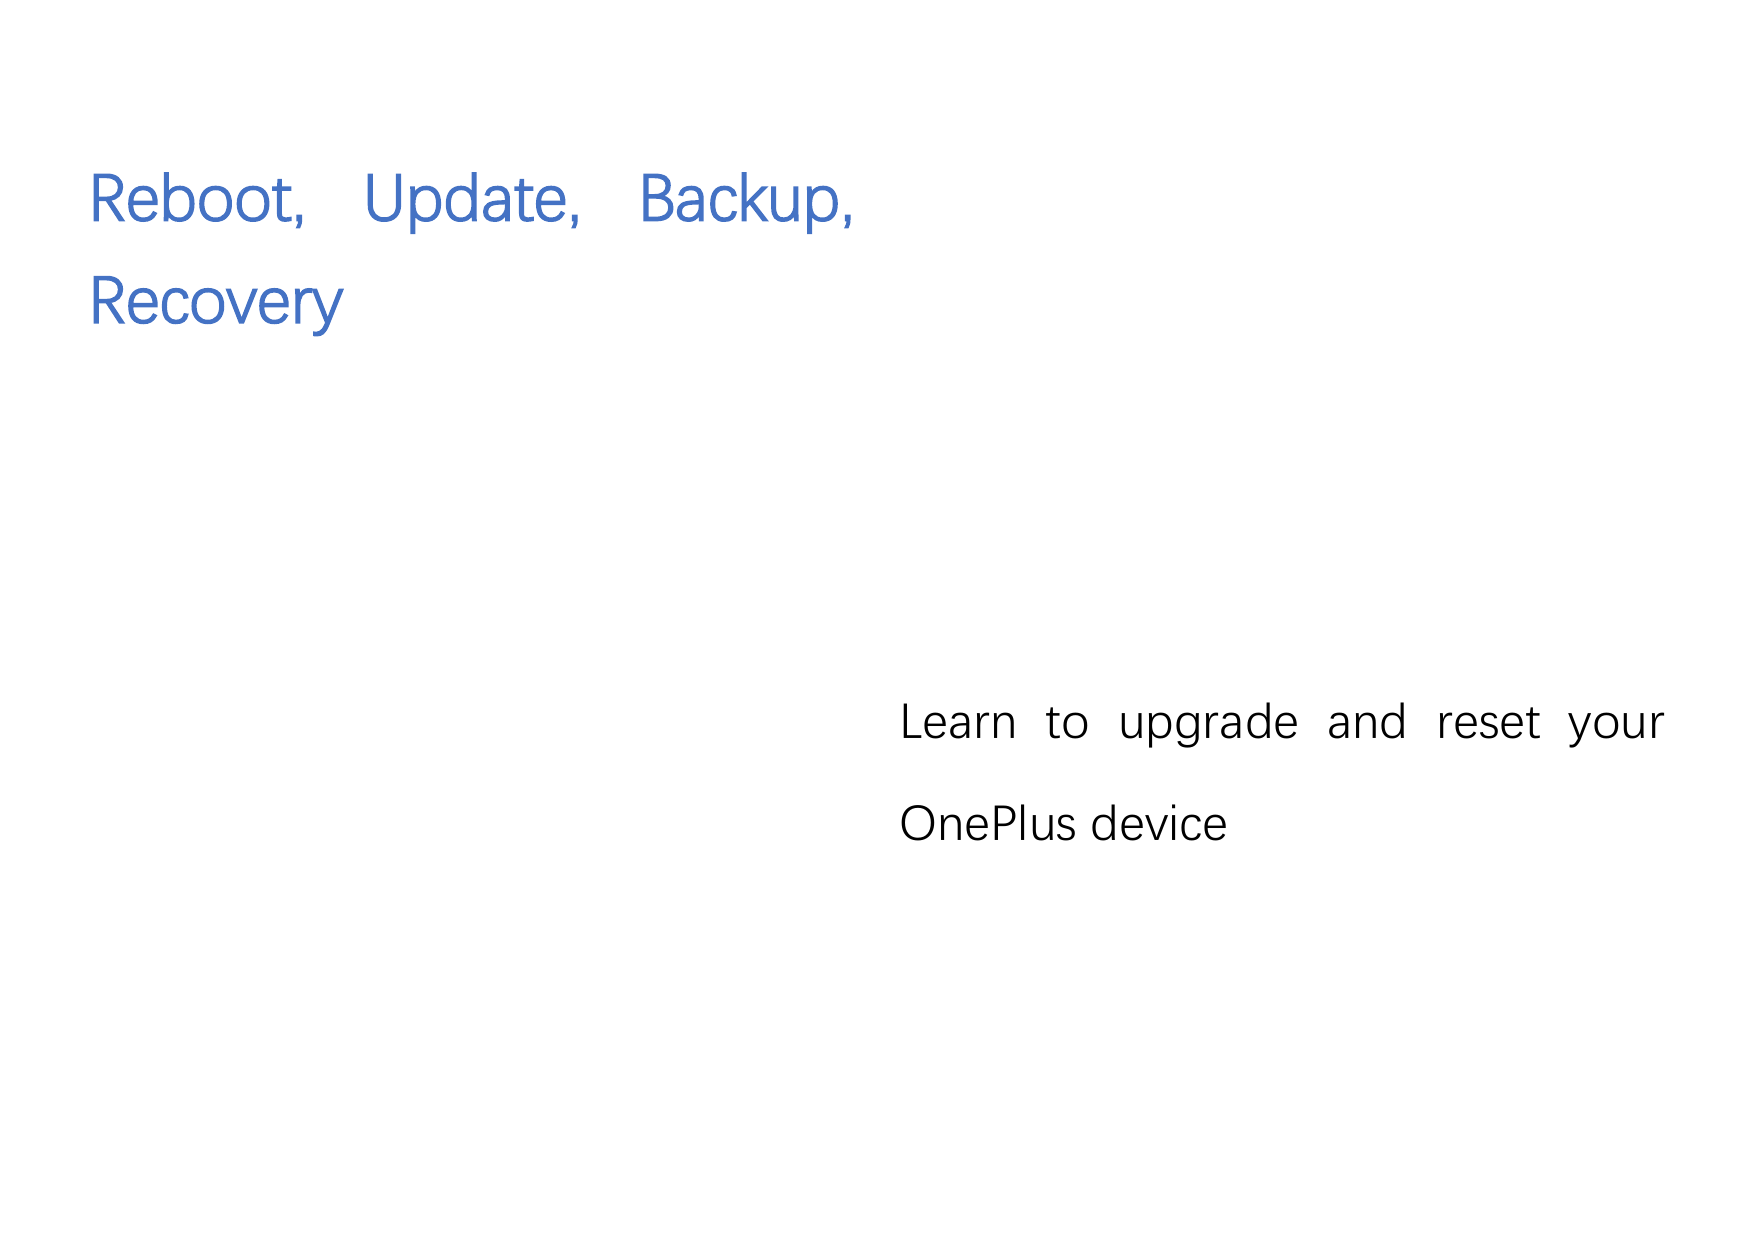 Reboot, Update, Backup,RecoveryLearn to upgrade and reset yourOnePlus device